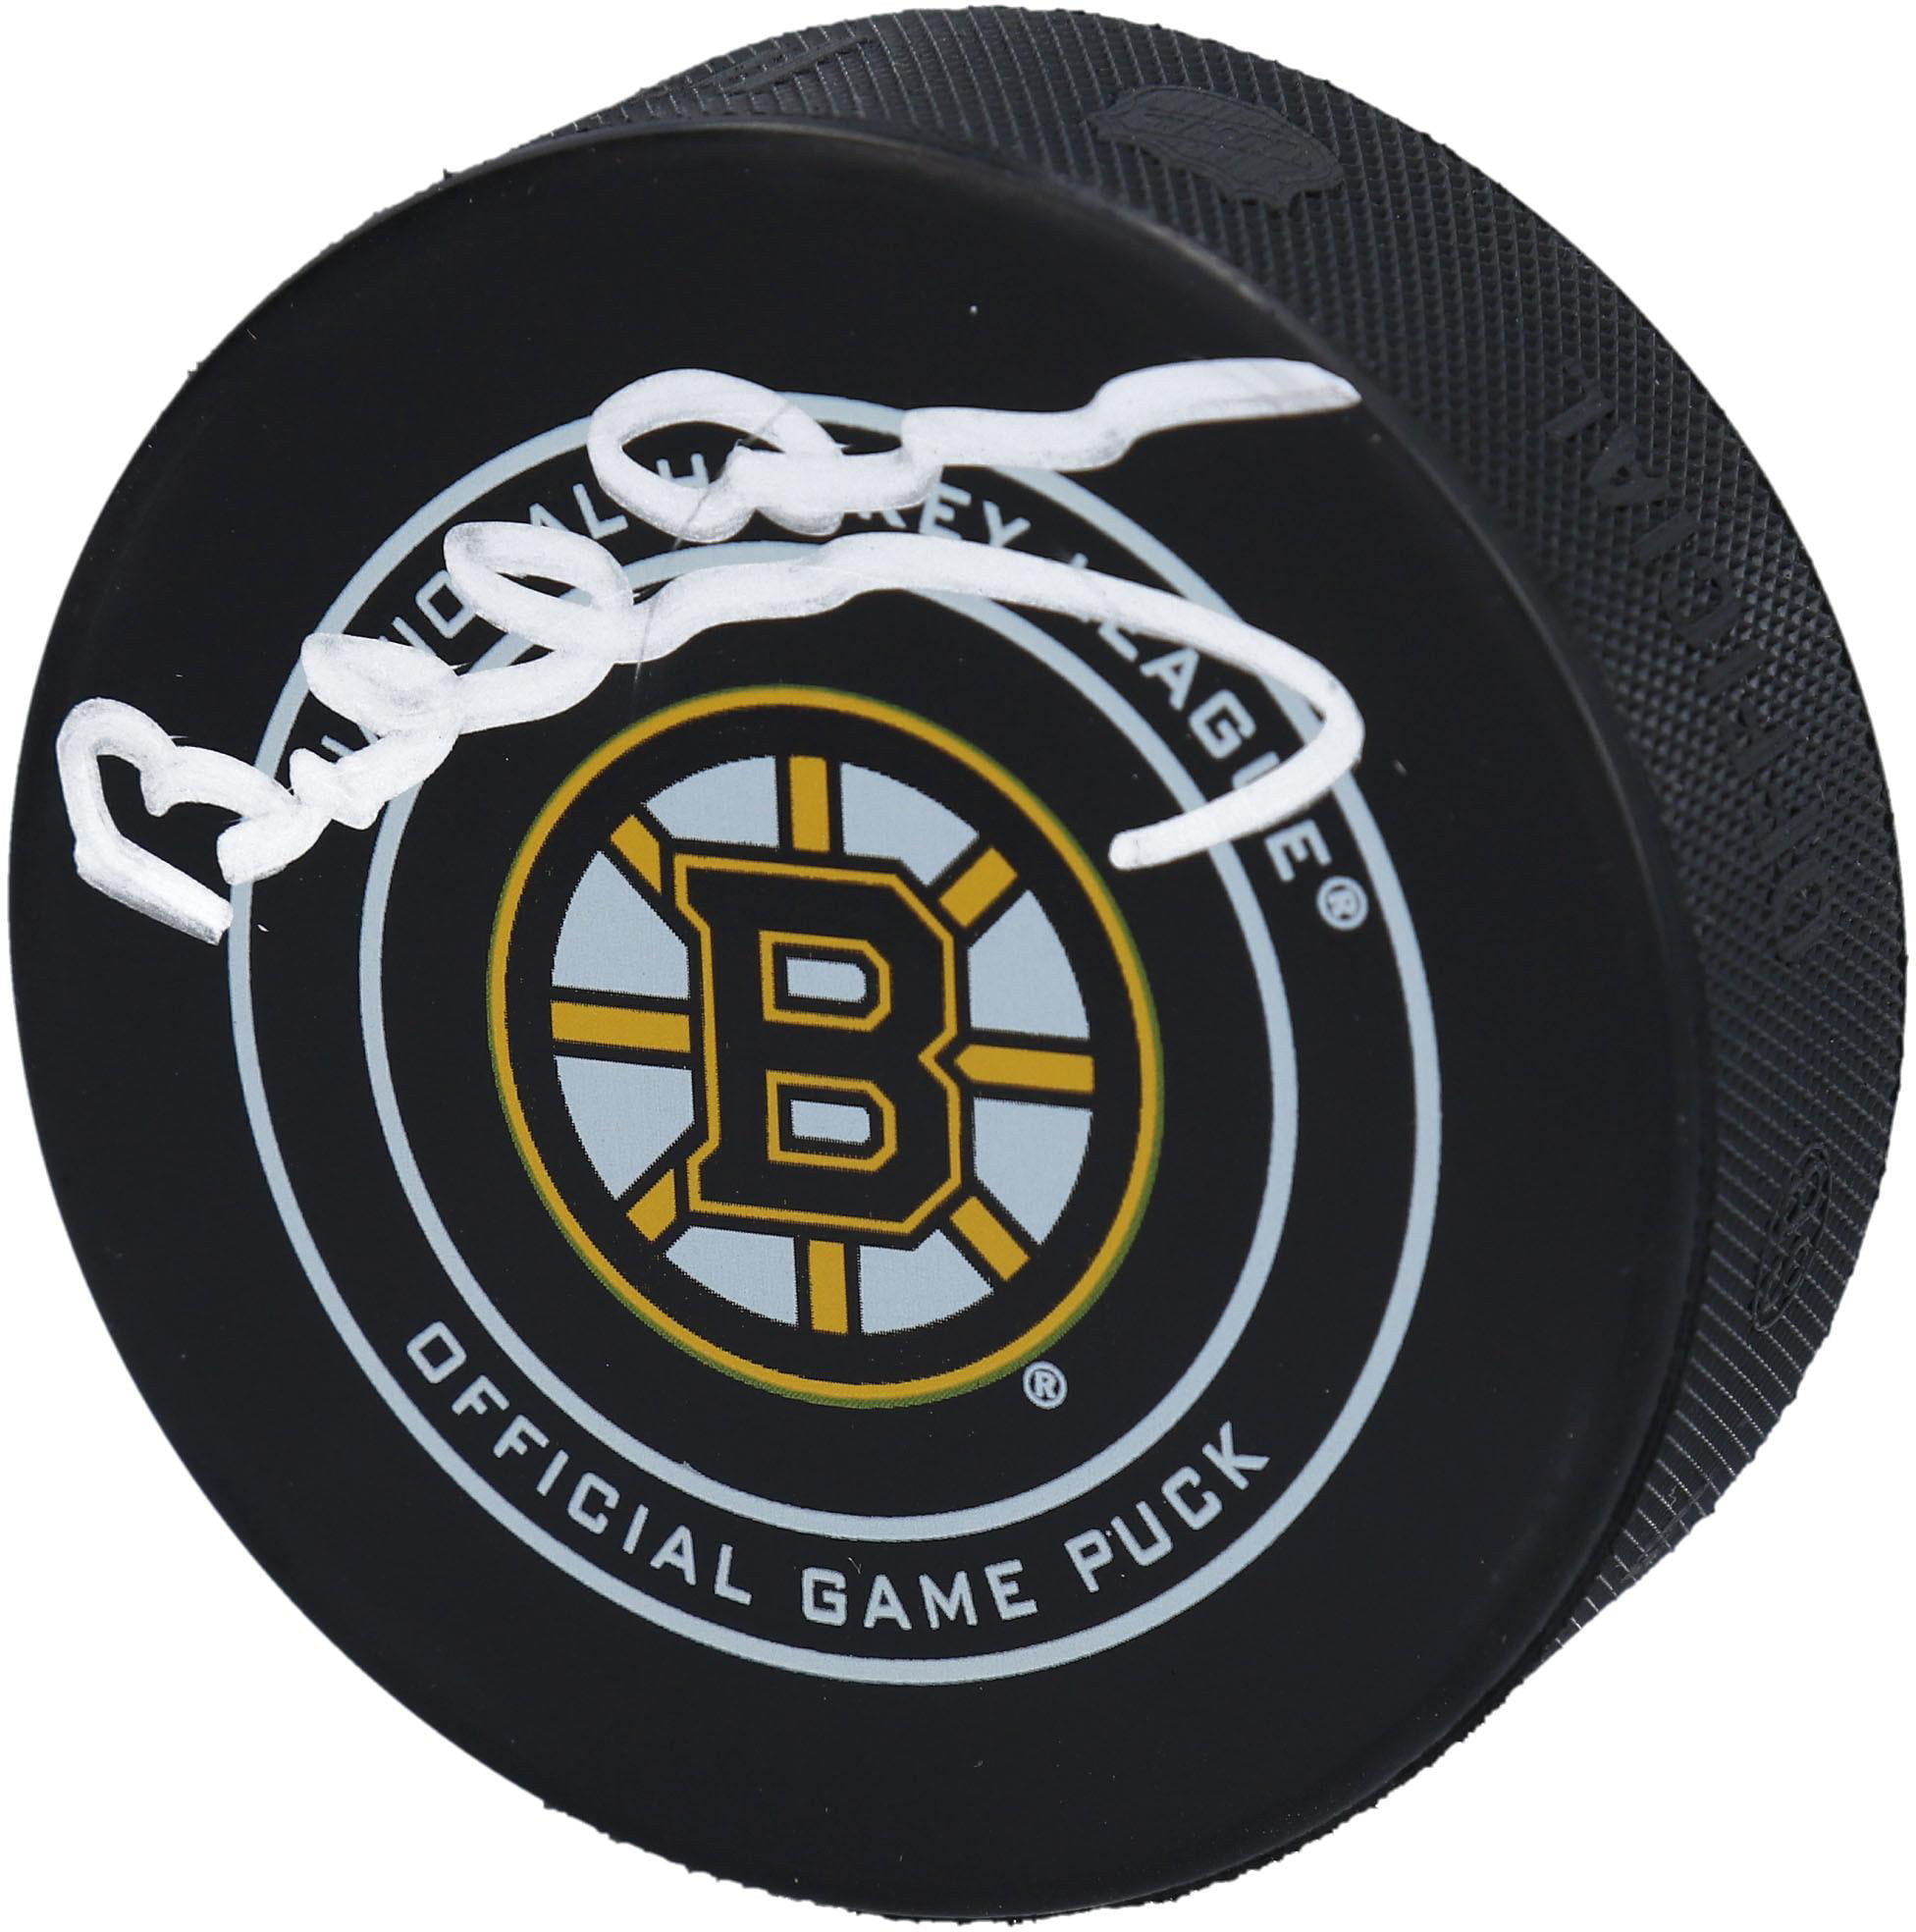 Fanatics Authentic Certified Torey Krug Boston Bruins Autographed 2019 Winter Classic Official Game Puck 